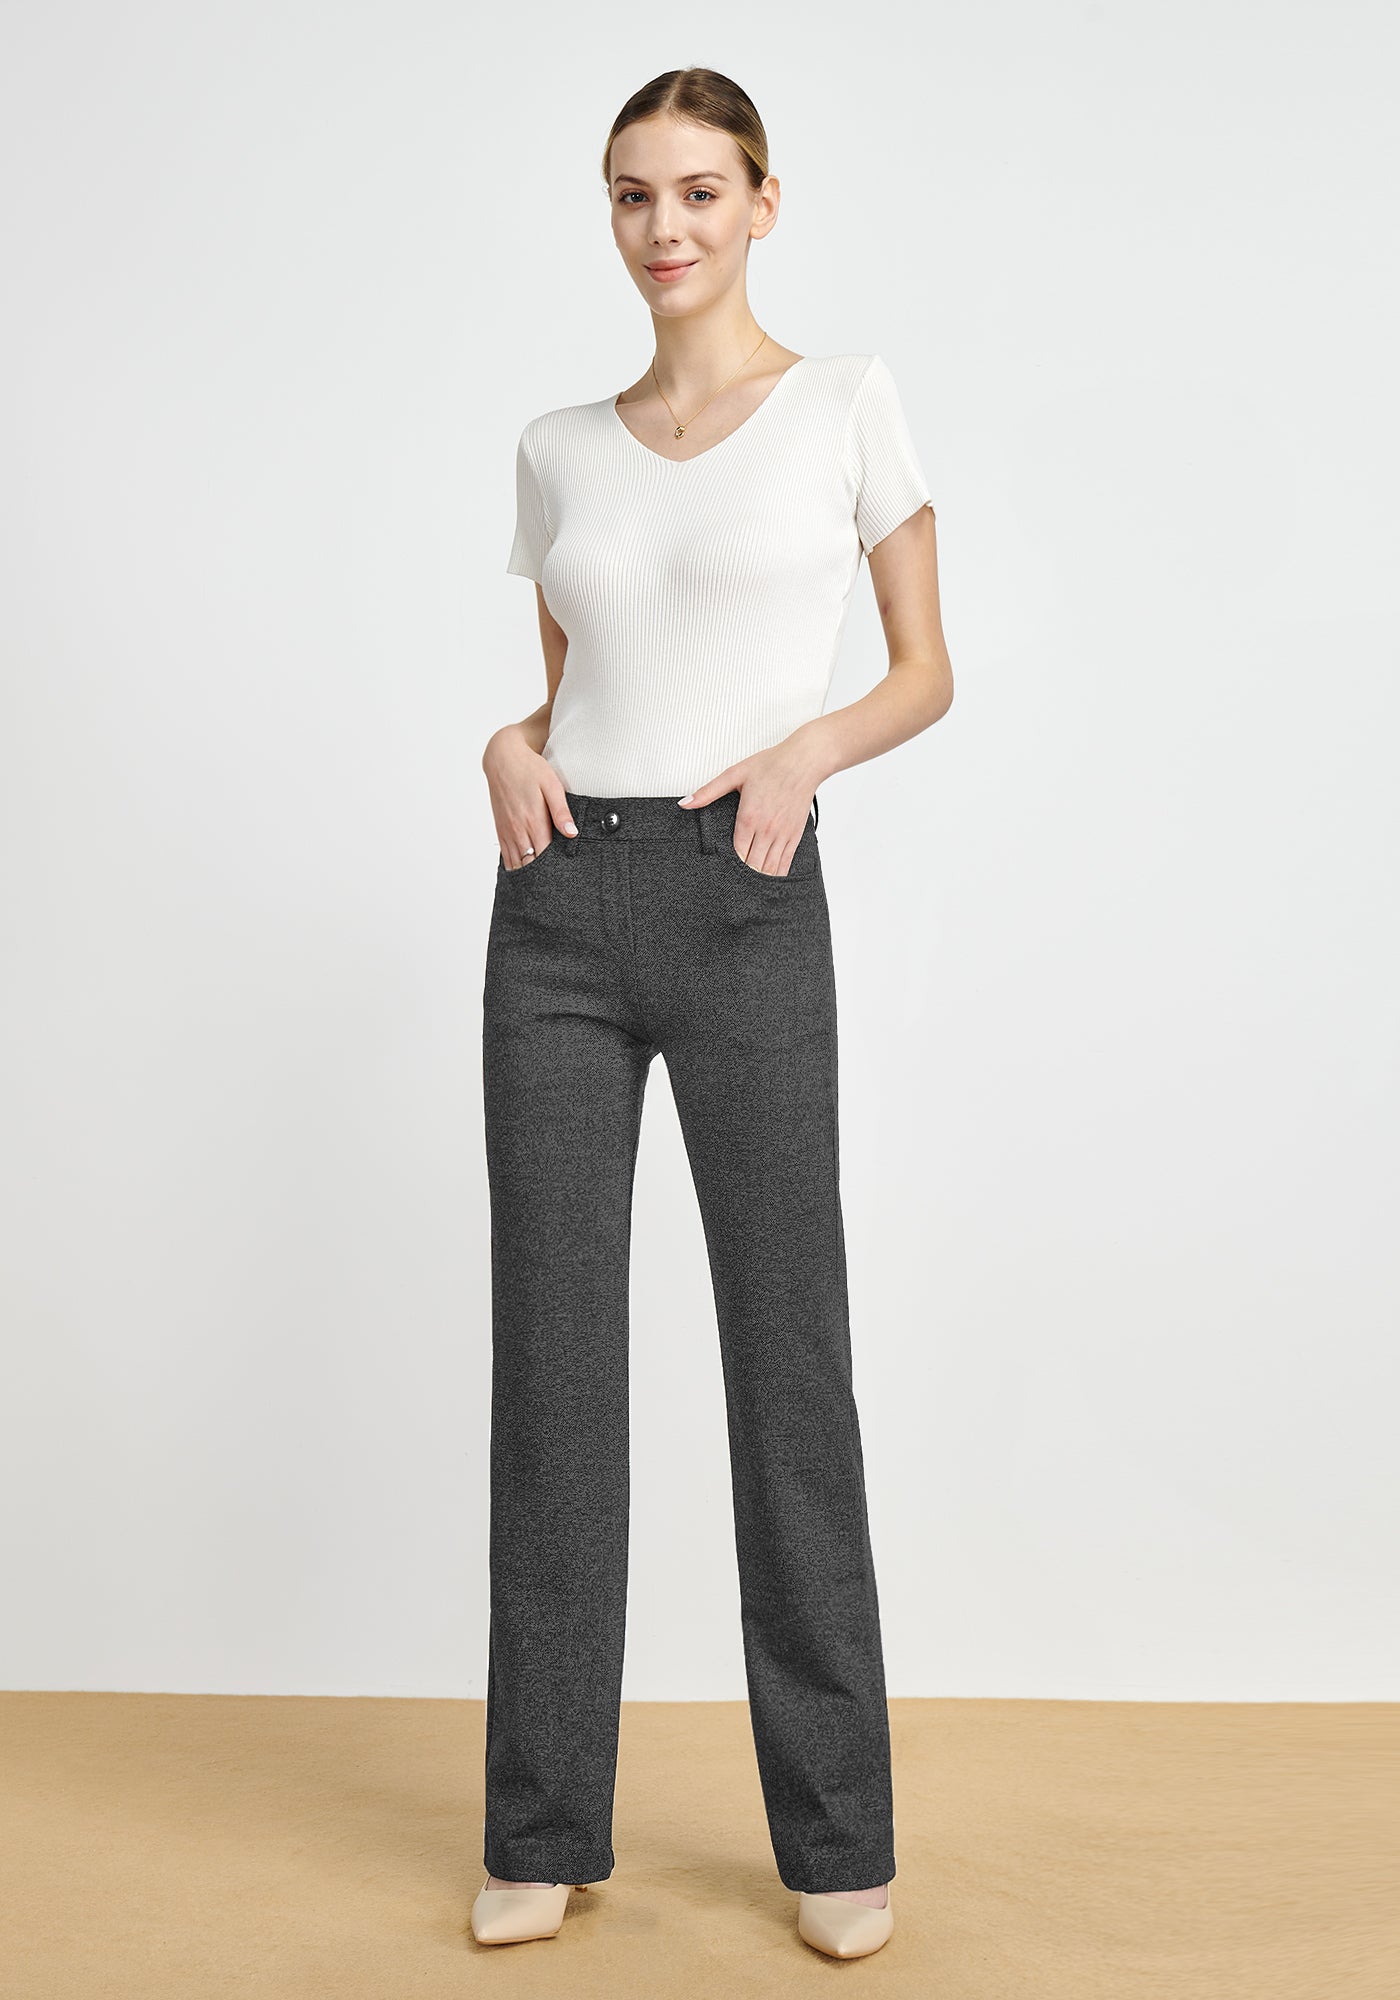 Stretchy Bootcut Dress Pants with 4 Pockets